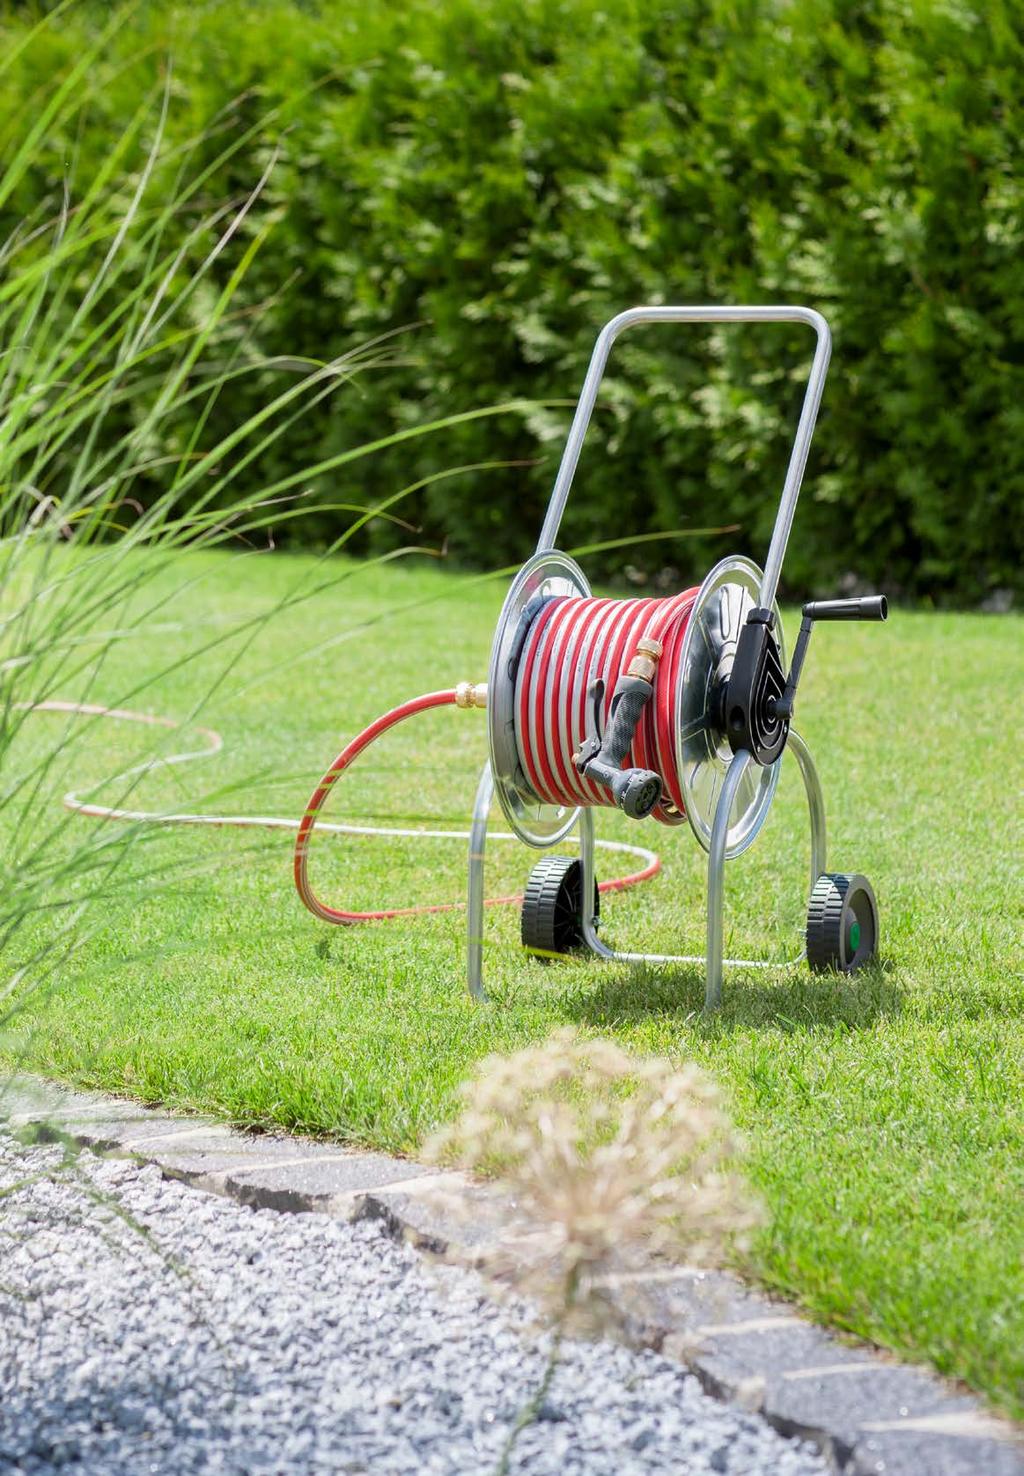 THE WATERING EXPERTS Garden hoses, accessories and fittings for